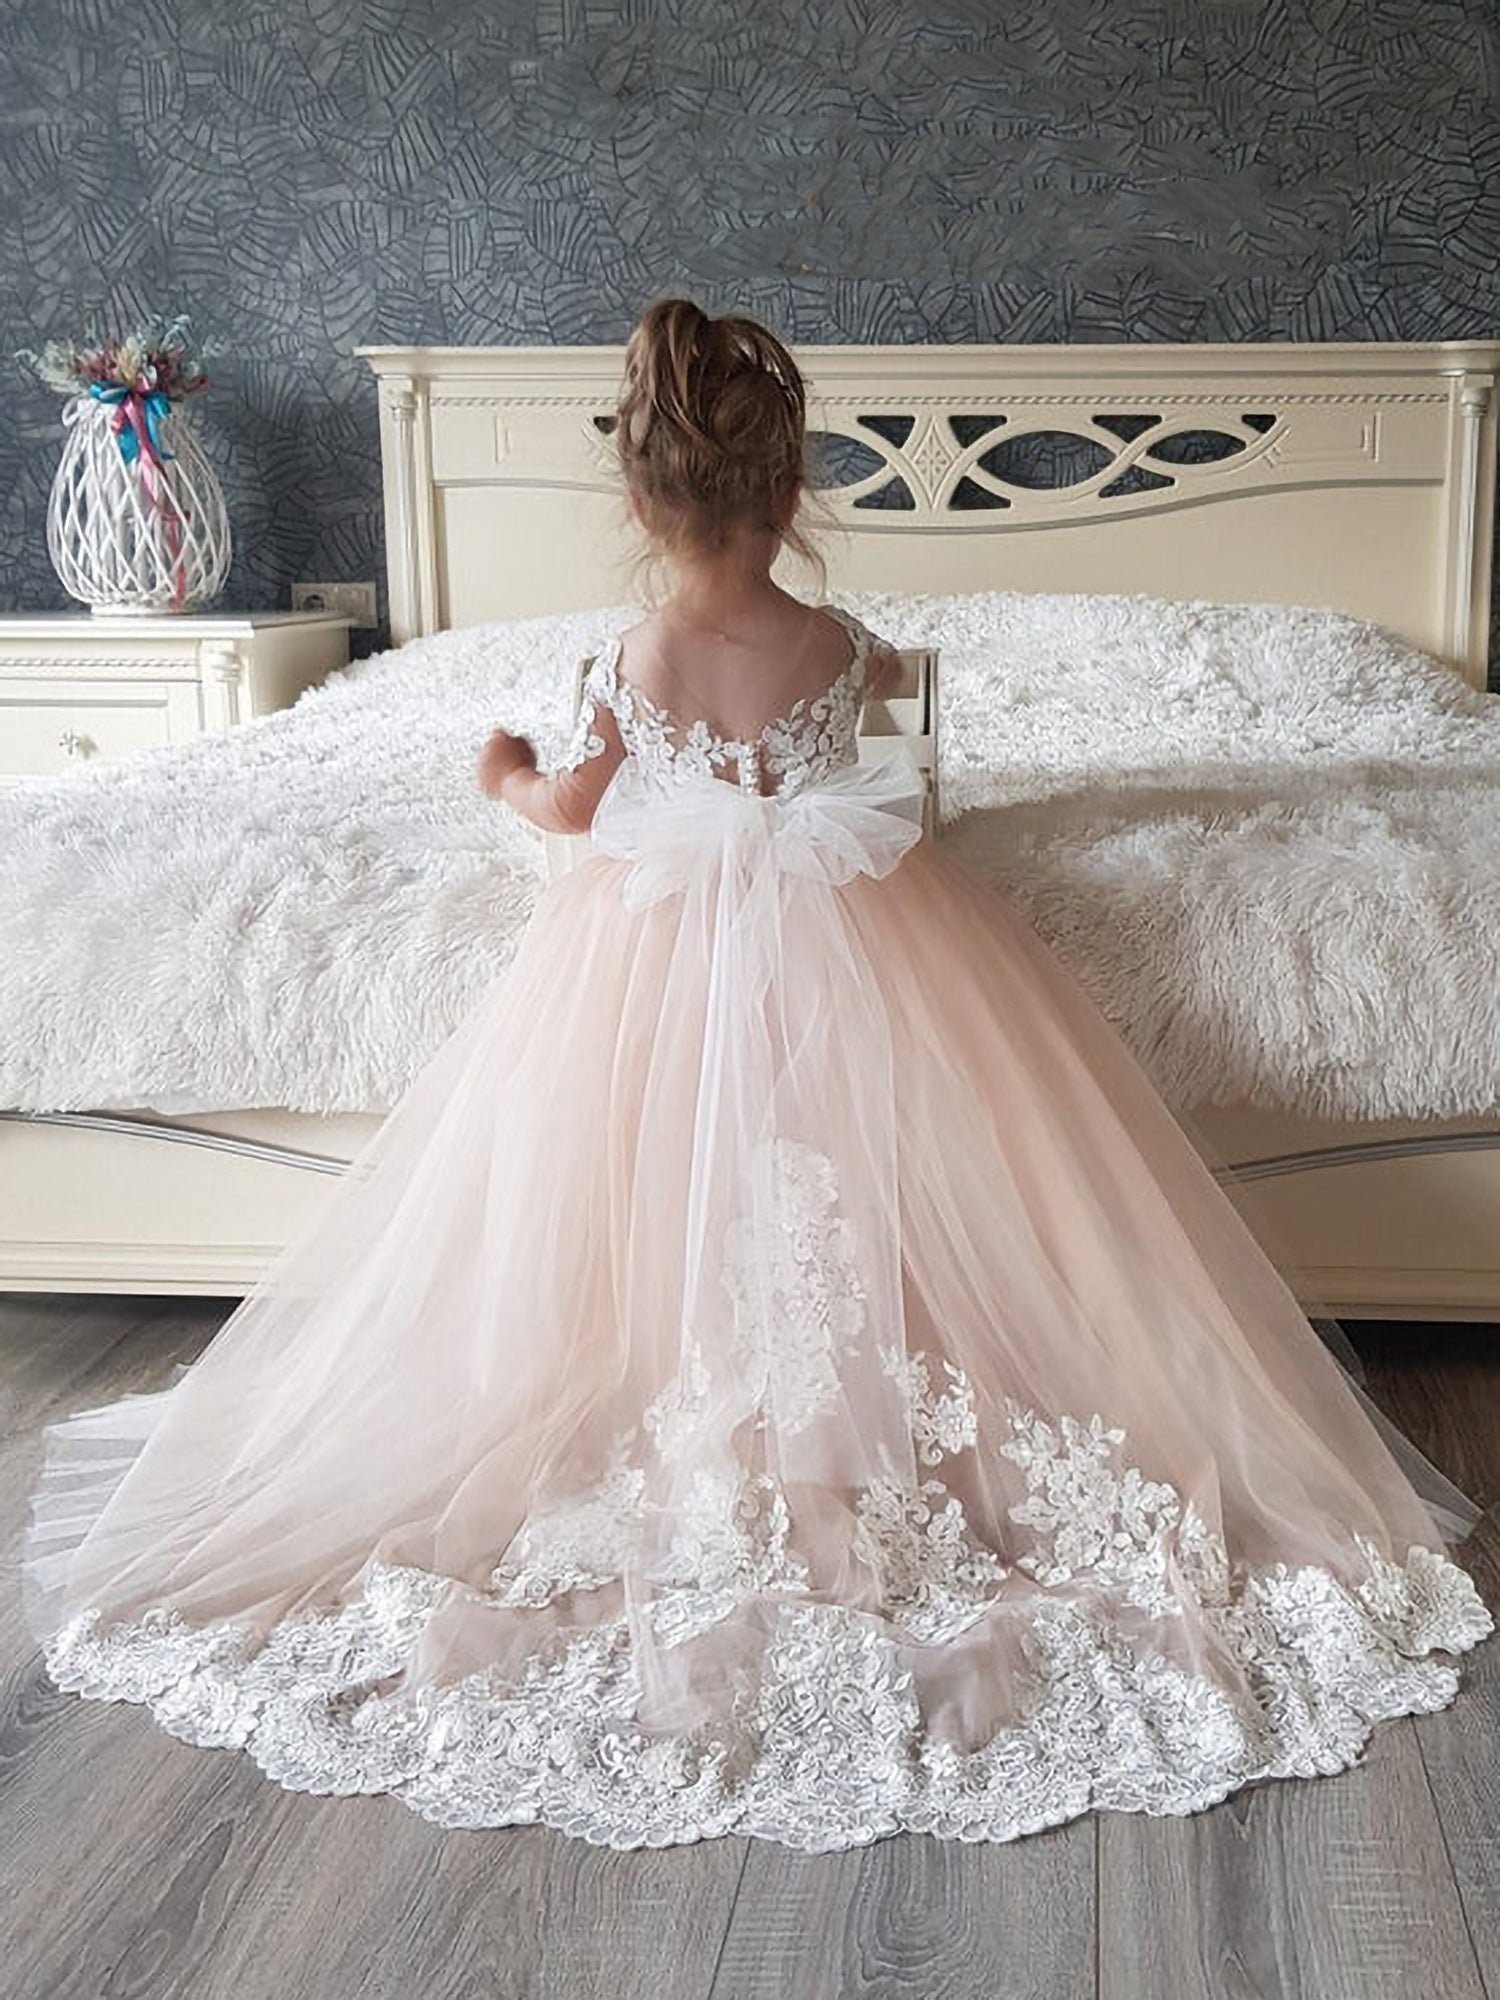 Luluslly Cute Boho Half-Sleeves Flower Girl Dresses Tulle Lace with Appliques Bow